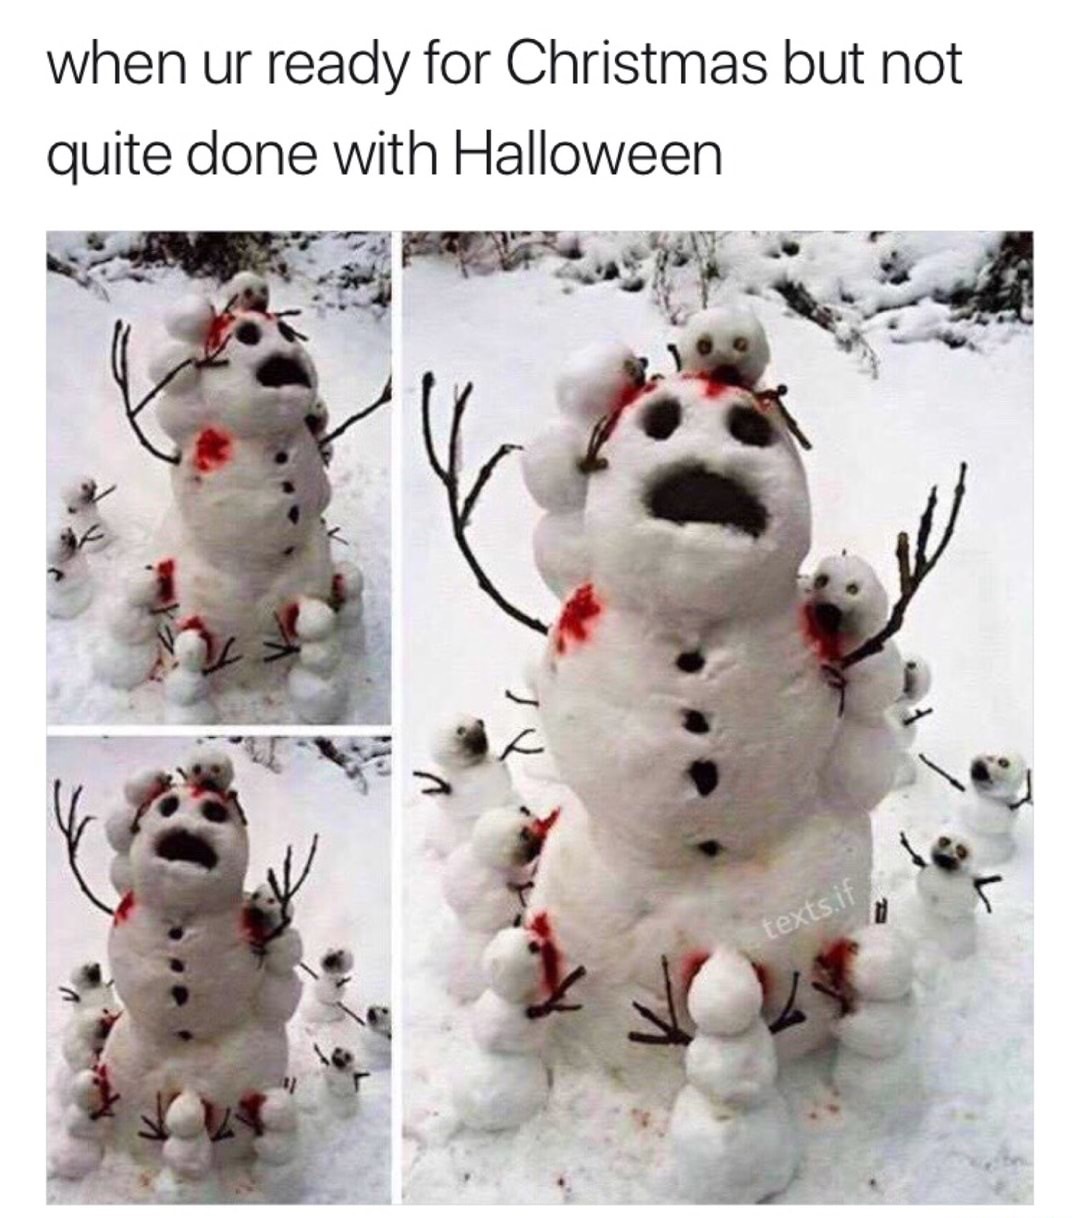 halloween snowman - when ur ready for Christmas but not quite done with Halloween